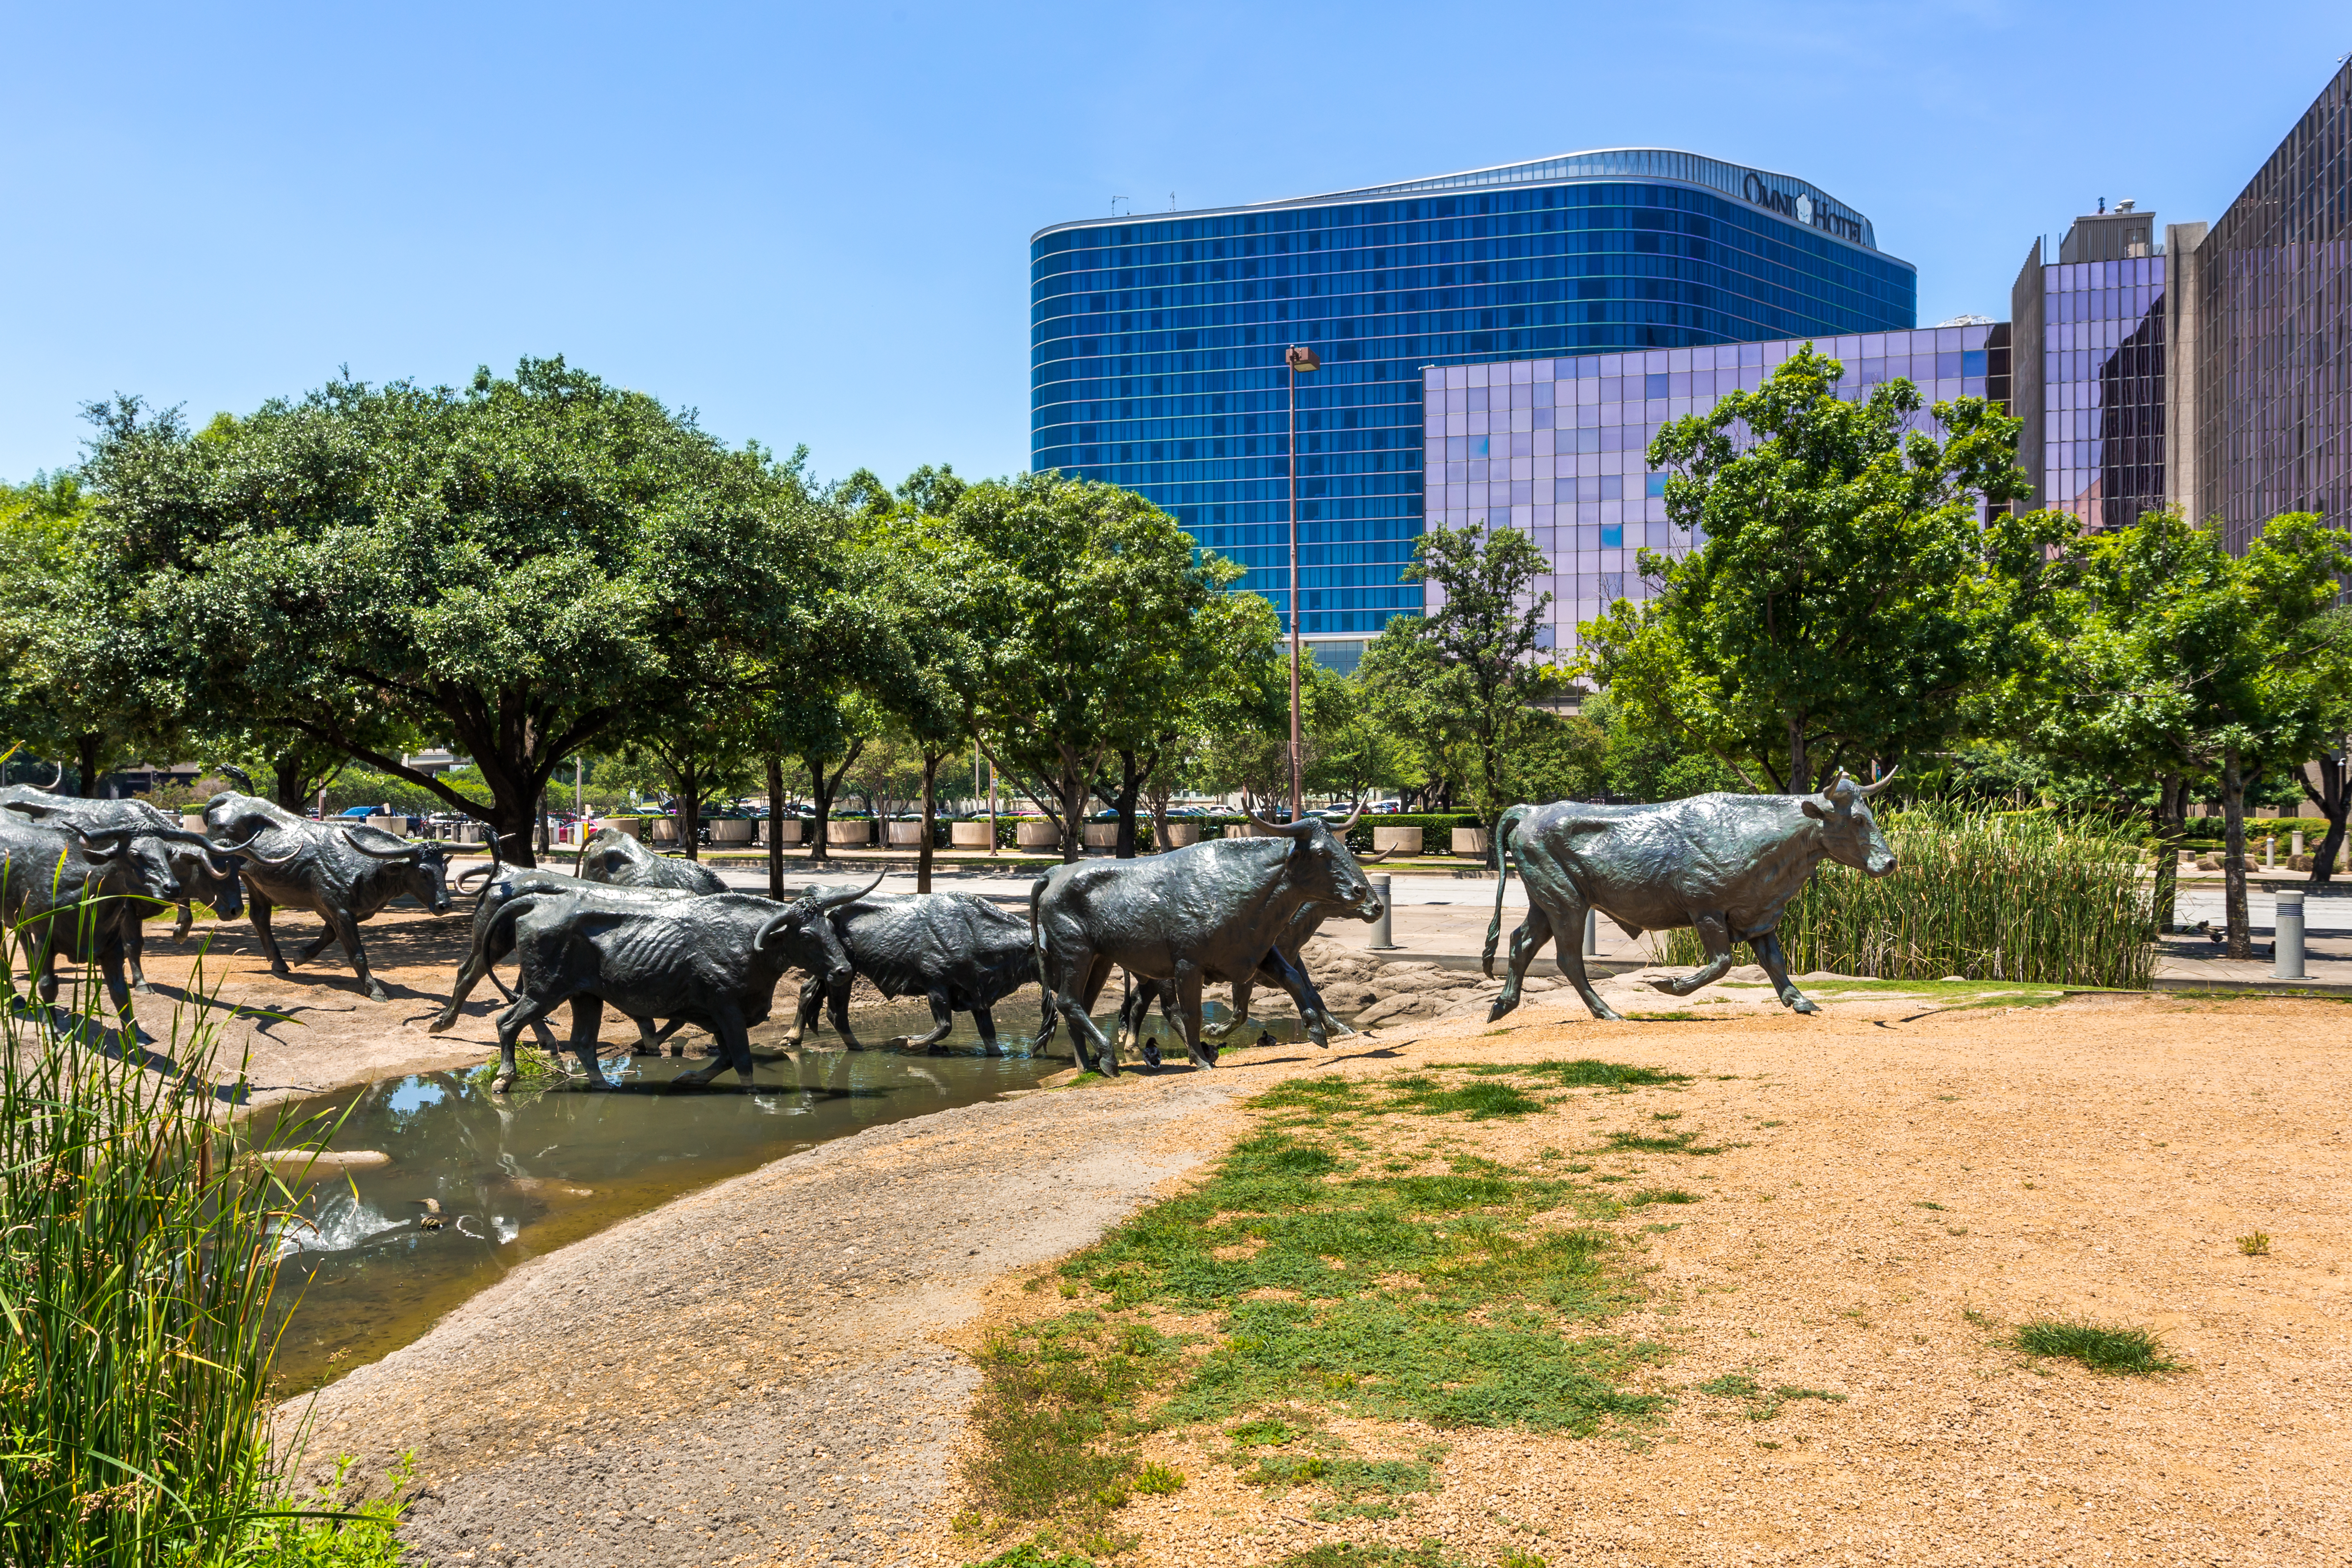 50 free things to do in dallas